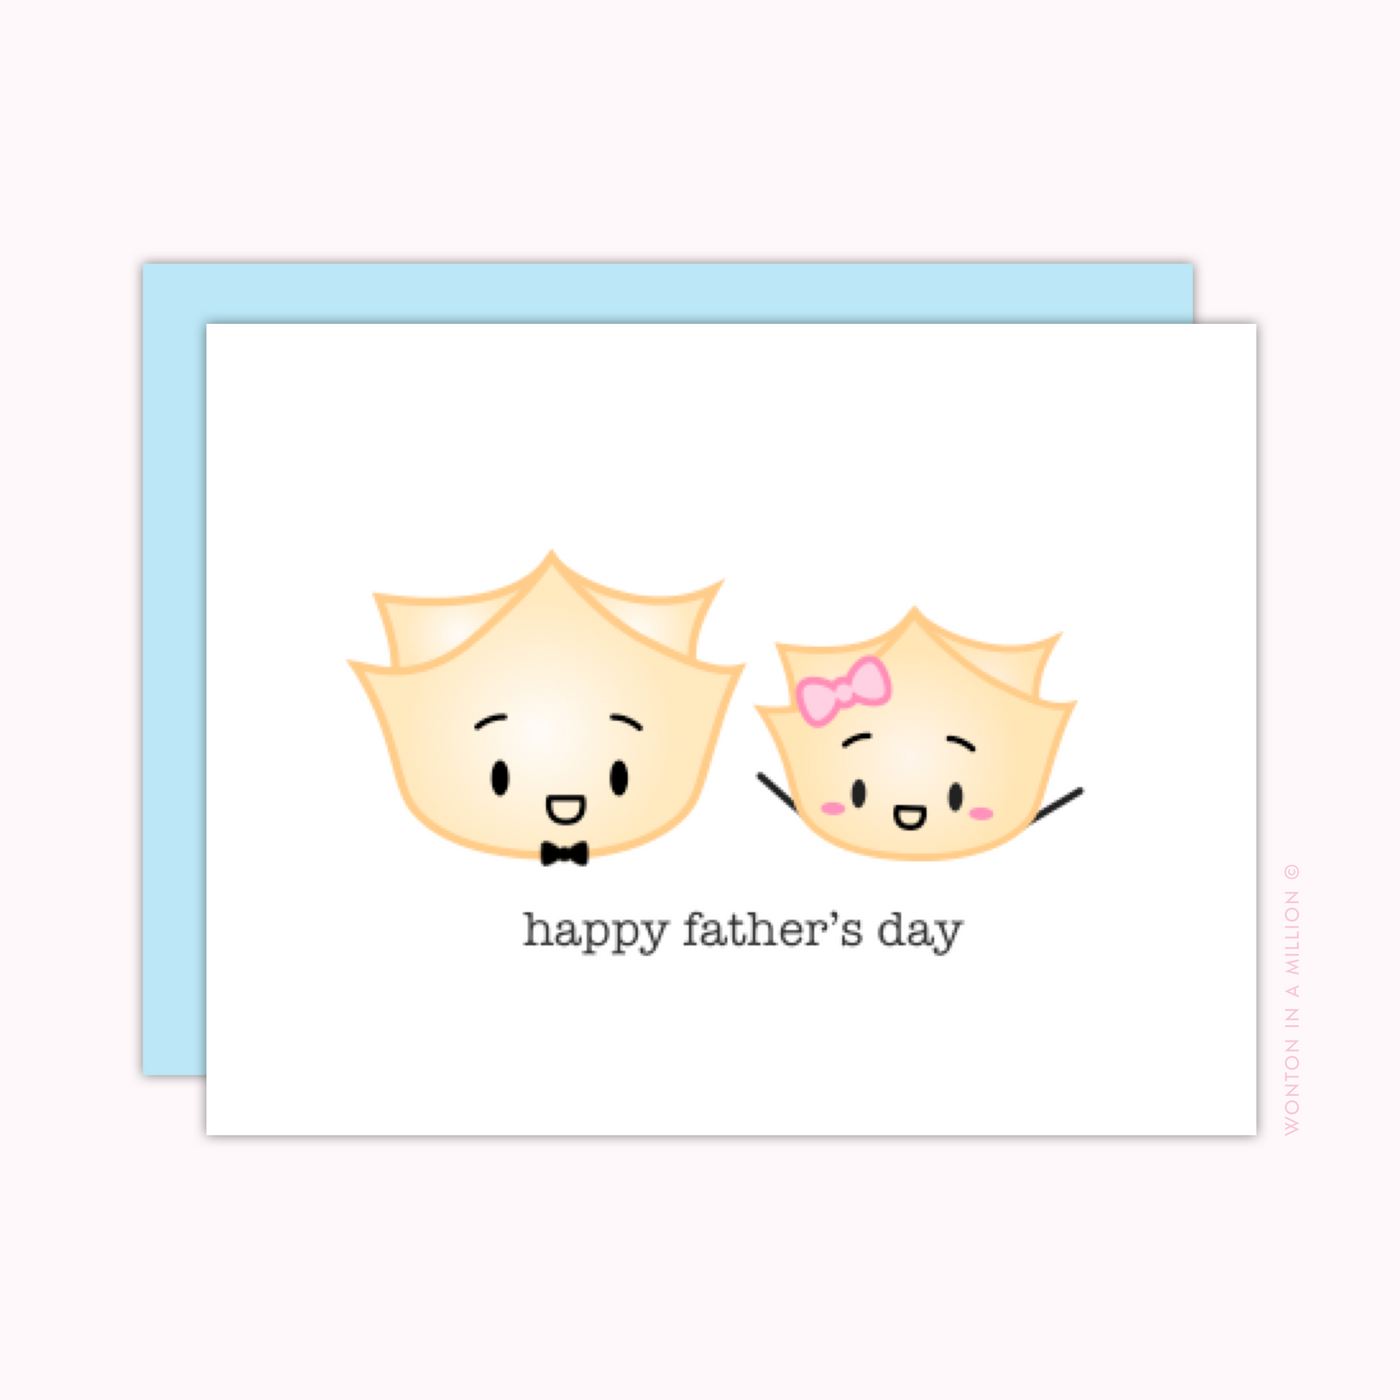 "Happy Father's Day!" Greeting Card (A2)